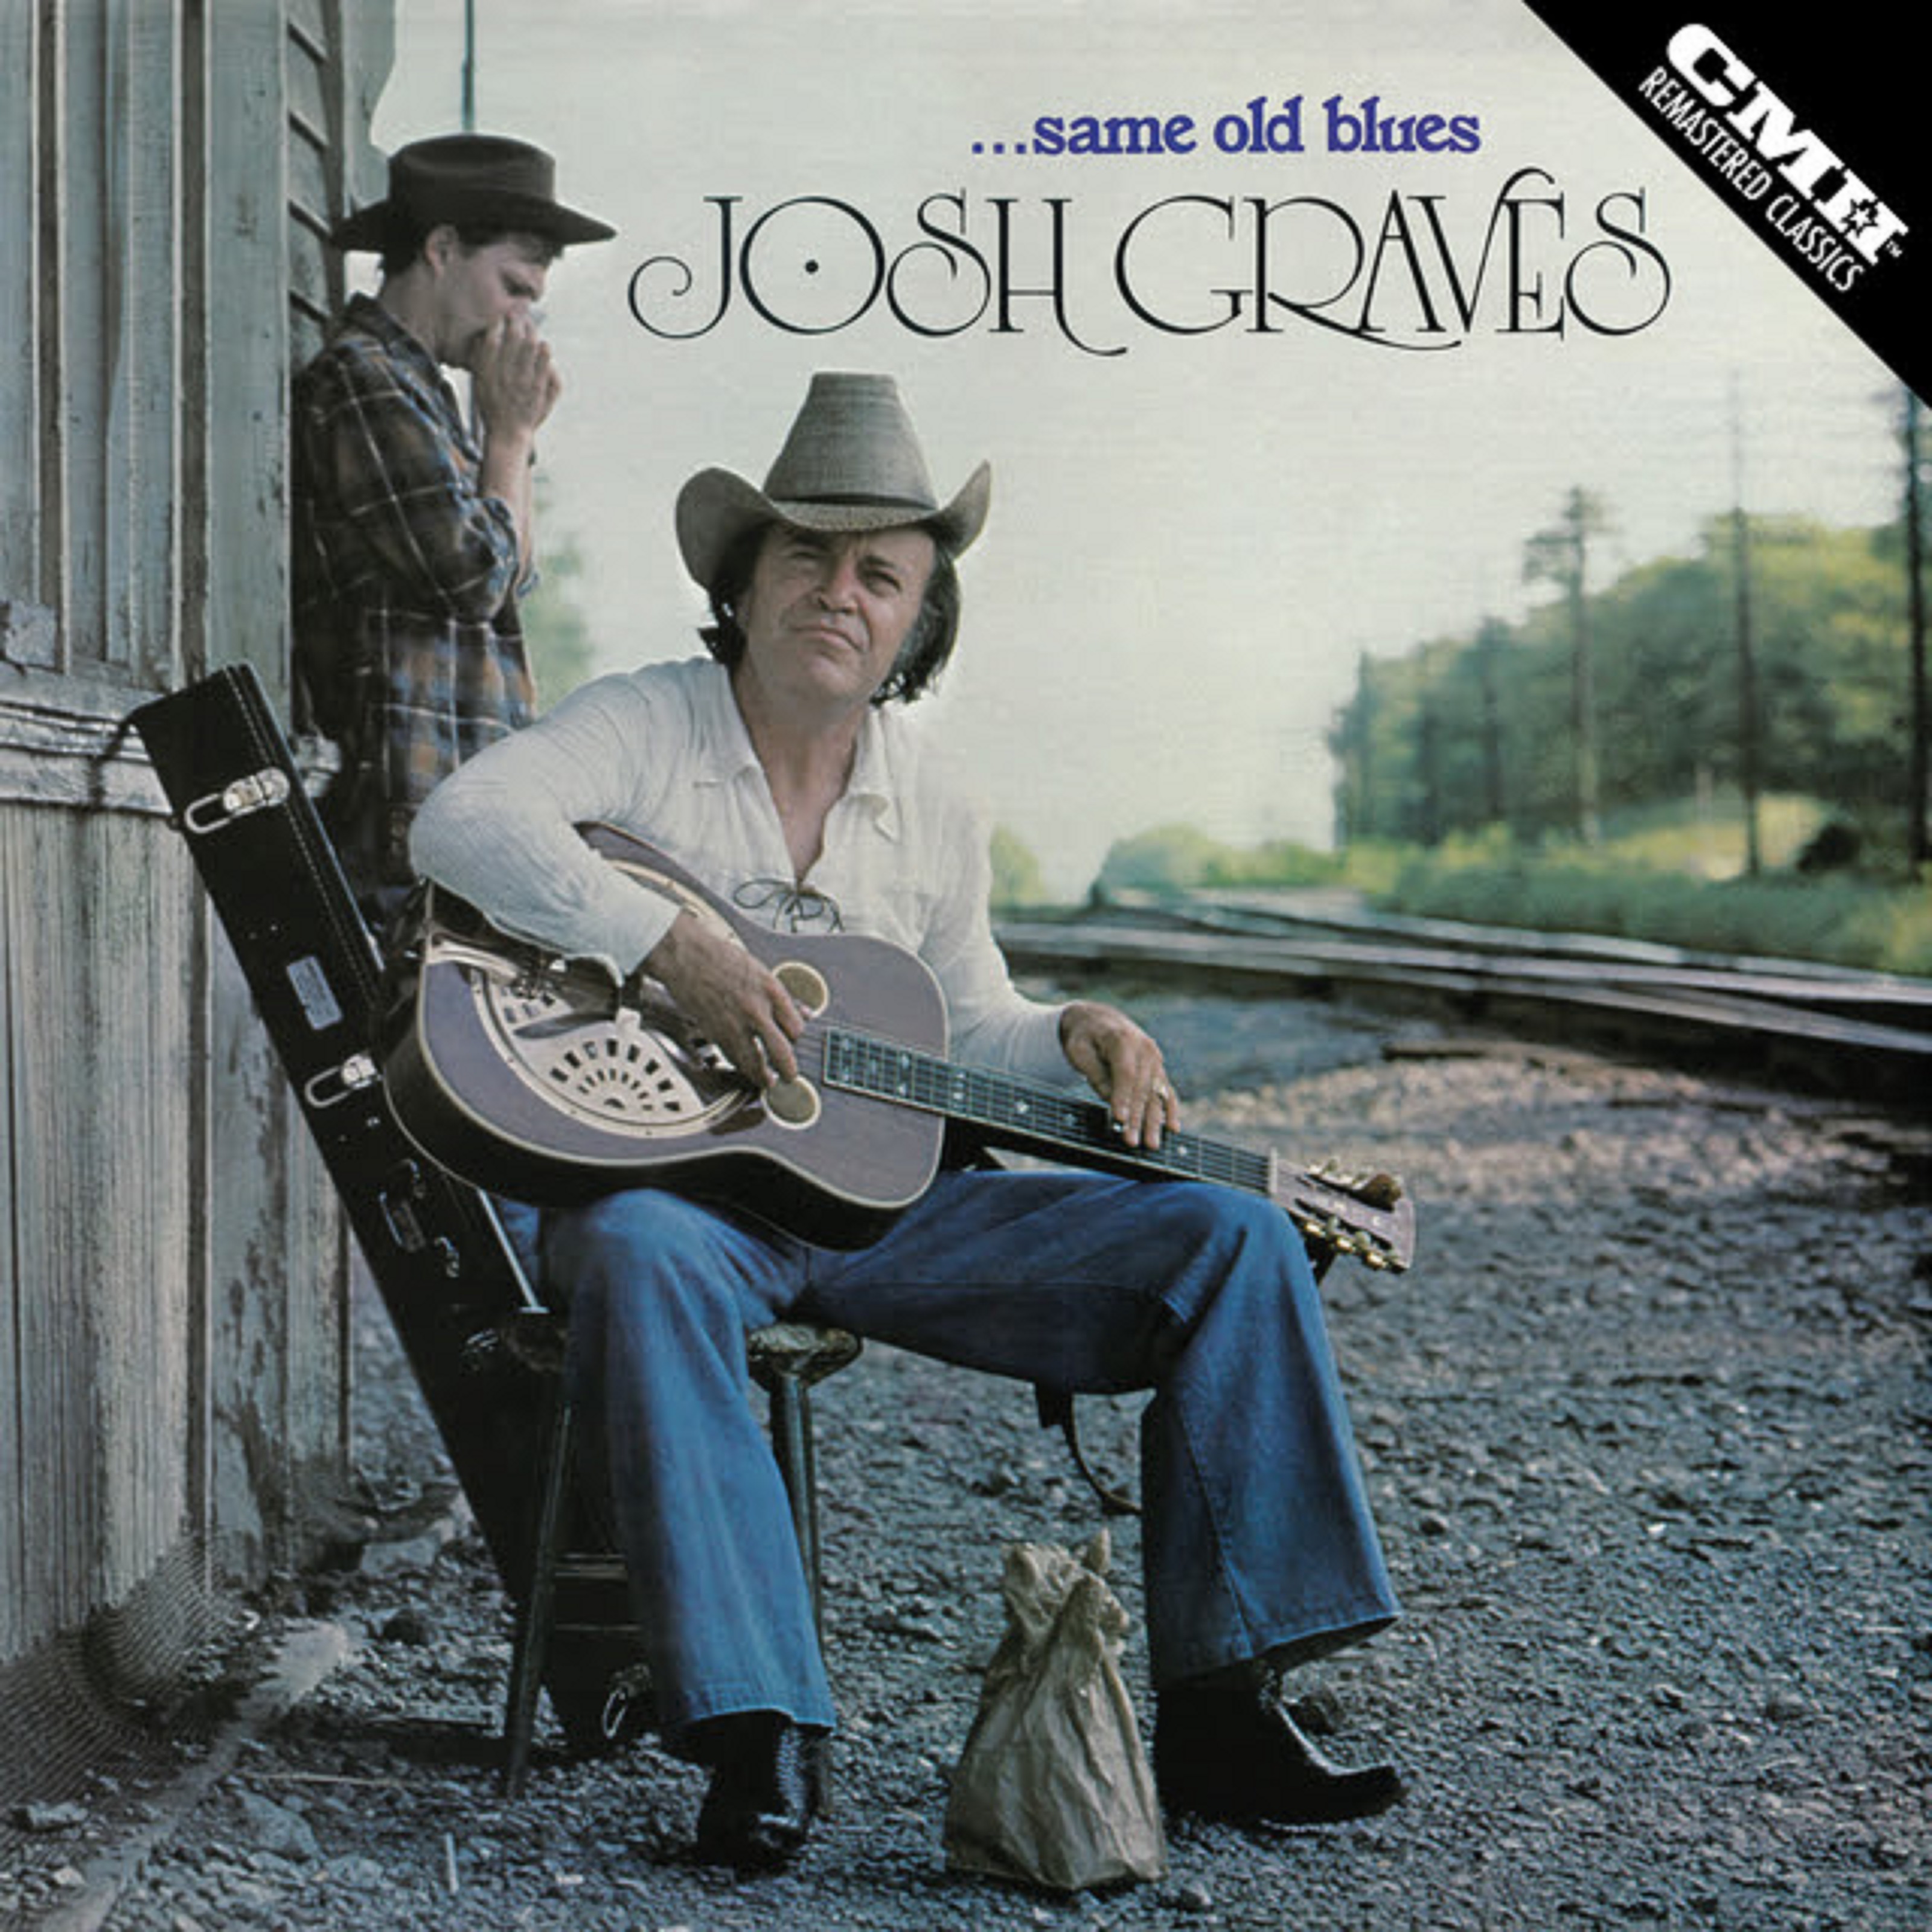 CMH Records Honors Legacy Release Josh Graves’ ‘Same Old Blues’; Classic 1977 Album Out Today, April 19 On Digital